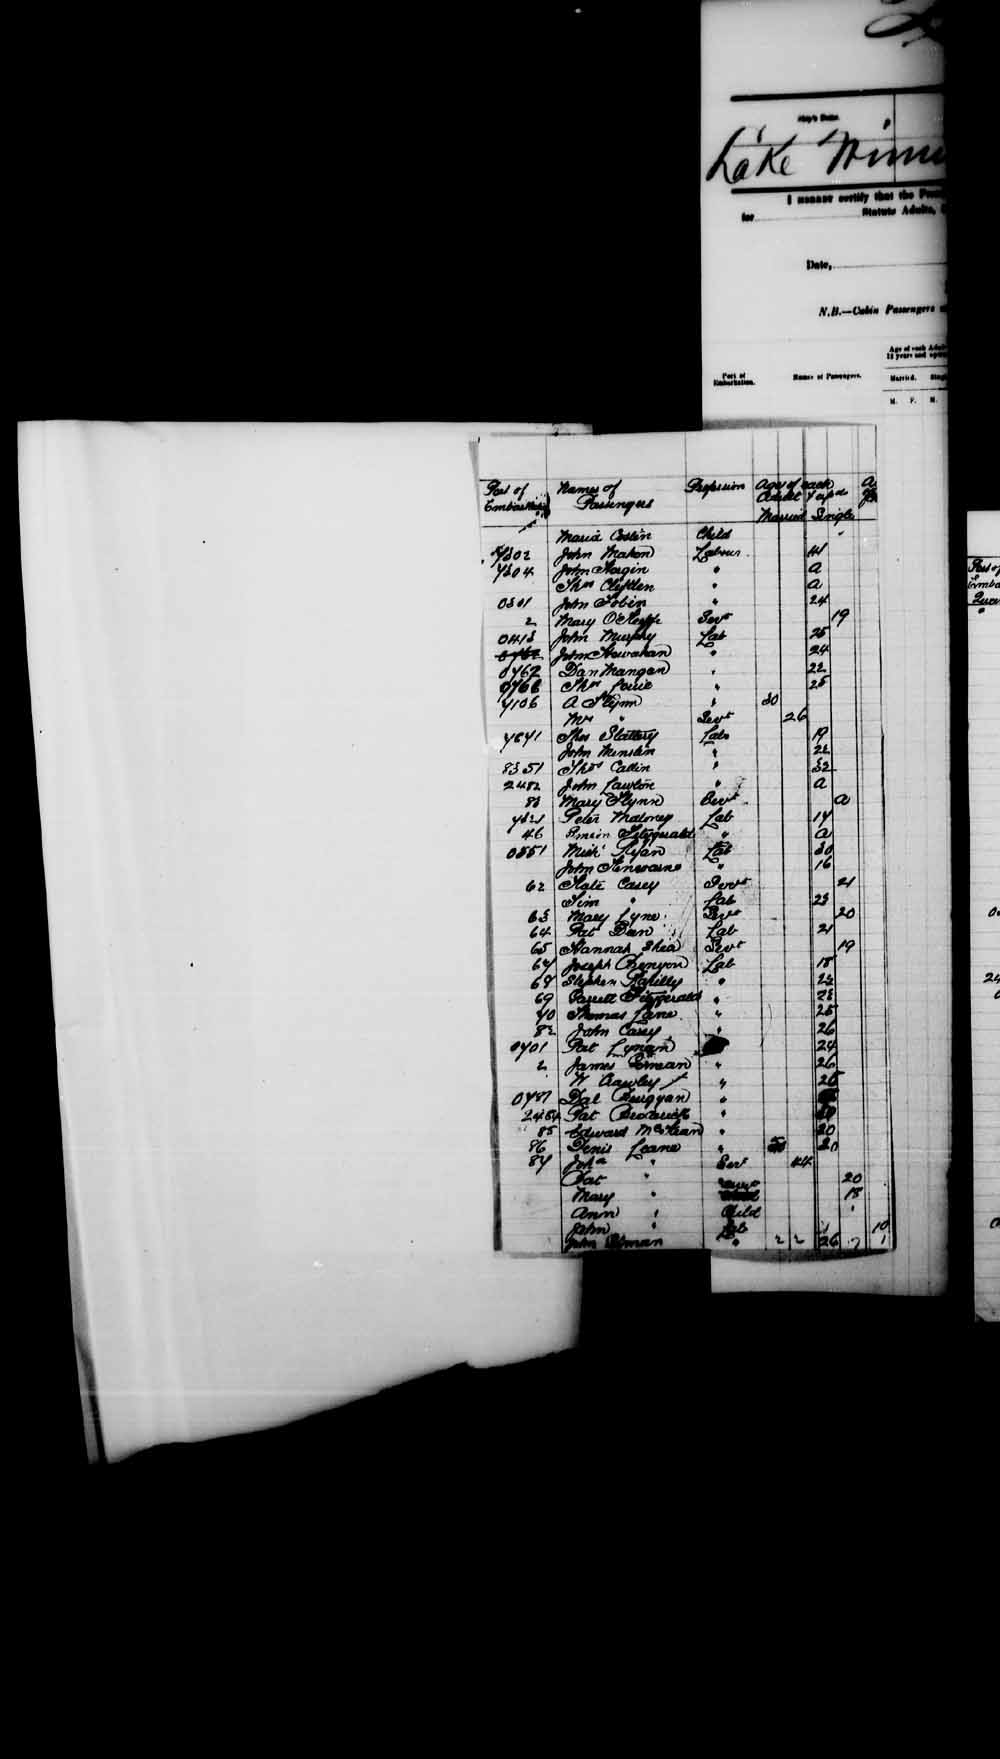 Digitized page of Passenger Lists for Image No.: e003541629